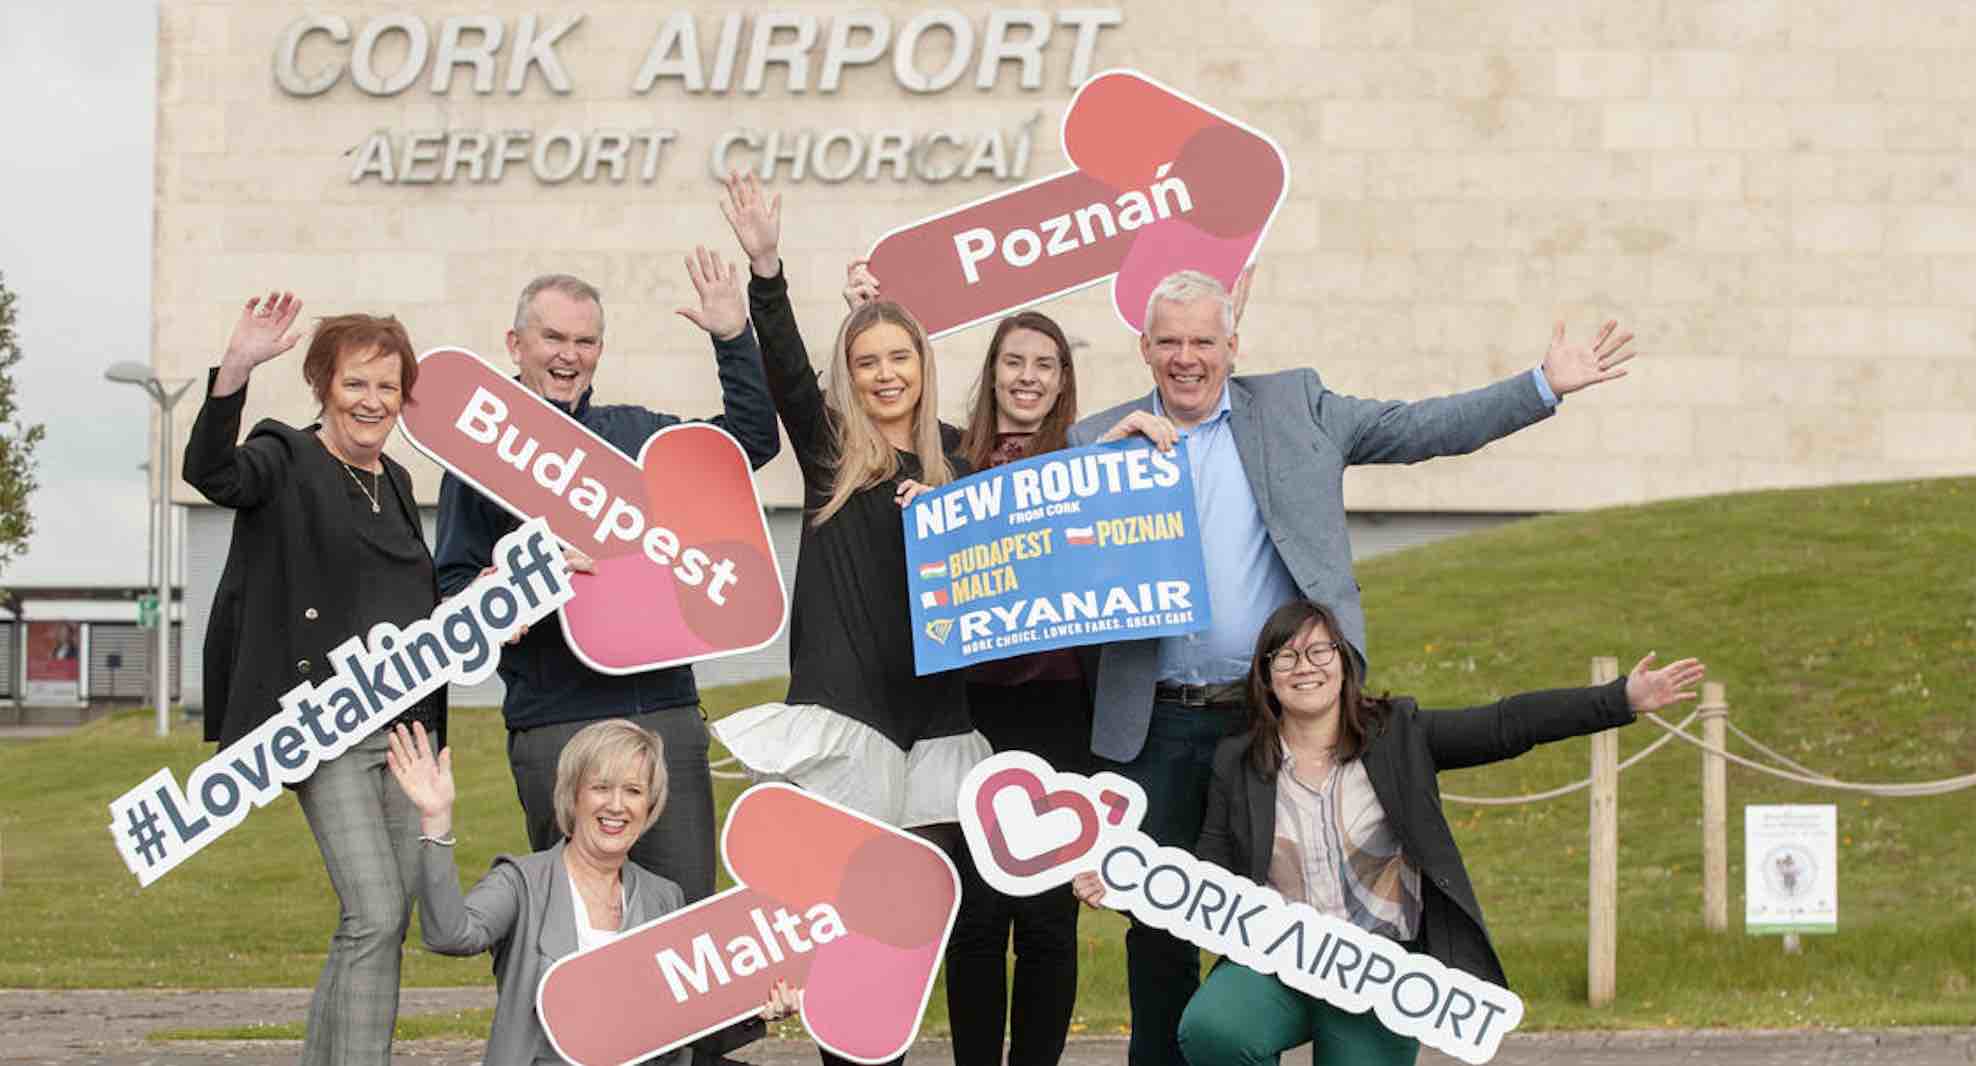 RYANAIR’S FIRST CORK TO BUDAPEST, POZNAN AND MALTA FLIGHTS TAKE OFF